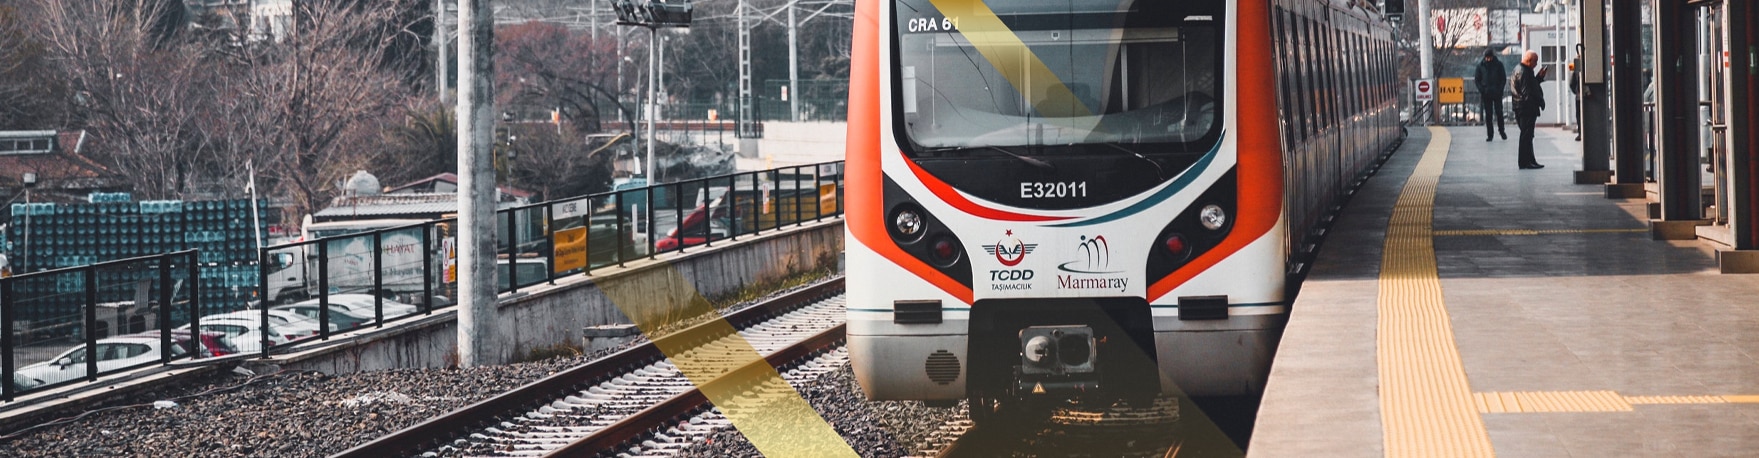 Airport metro due to open in 2021 1